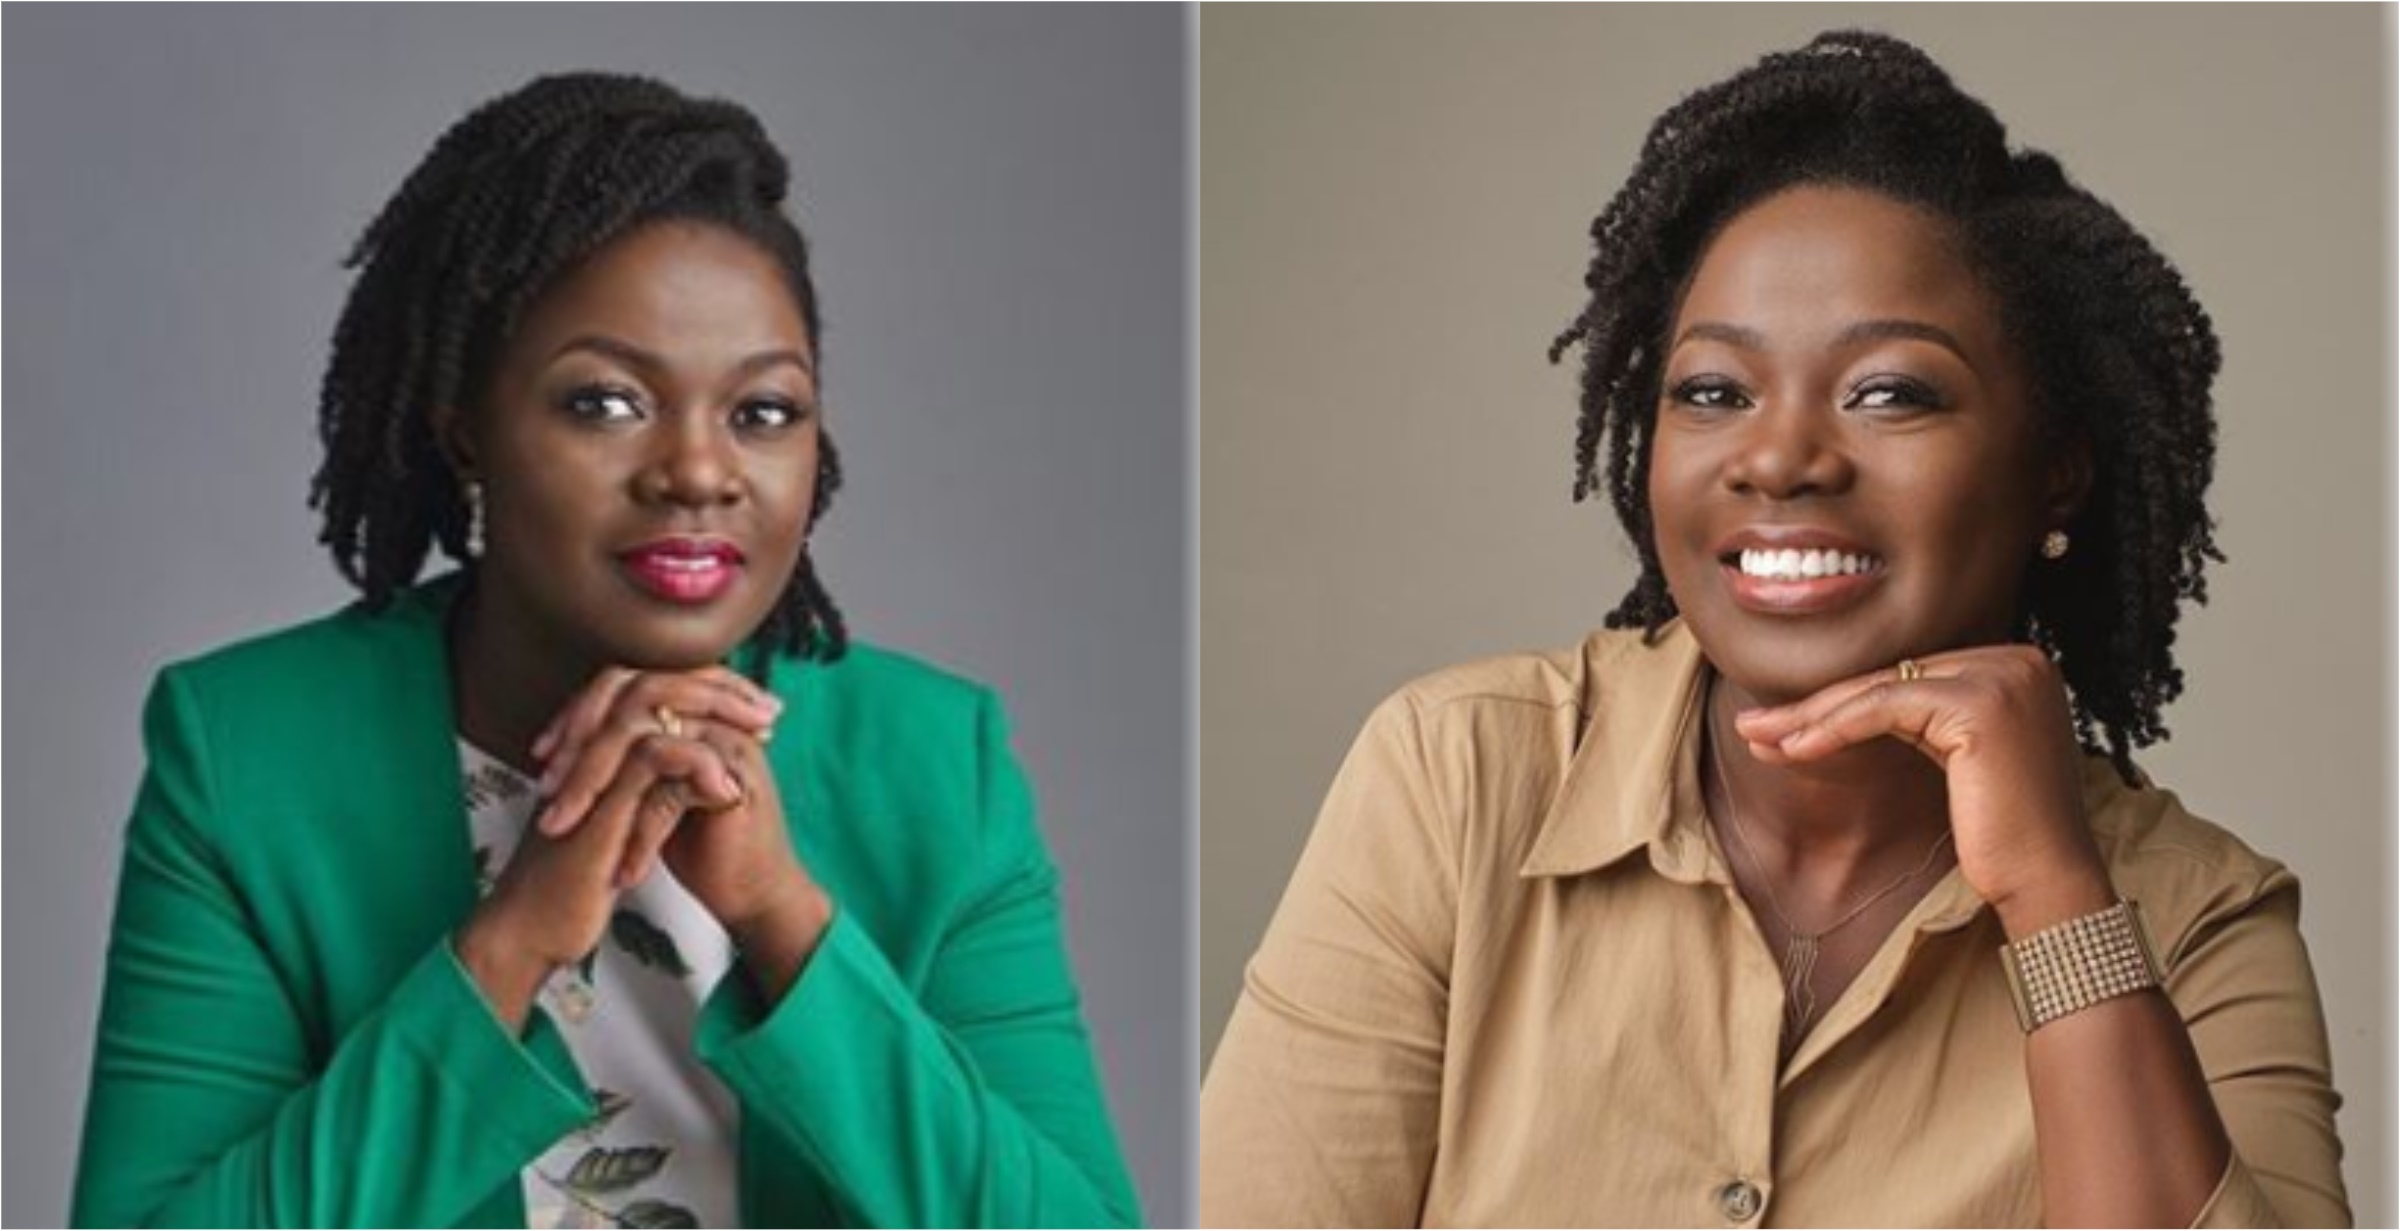 Boss lady: Lucy Quist appointed Chief Diversity and Inclusion Officer at Morgan Stanley